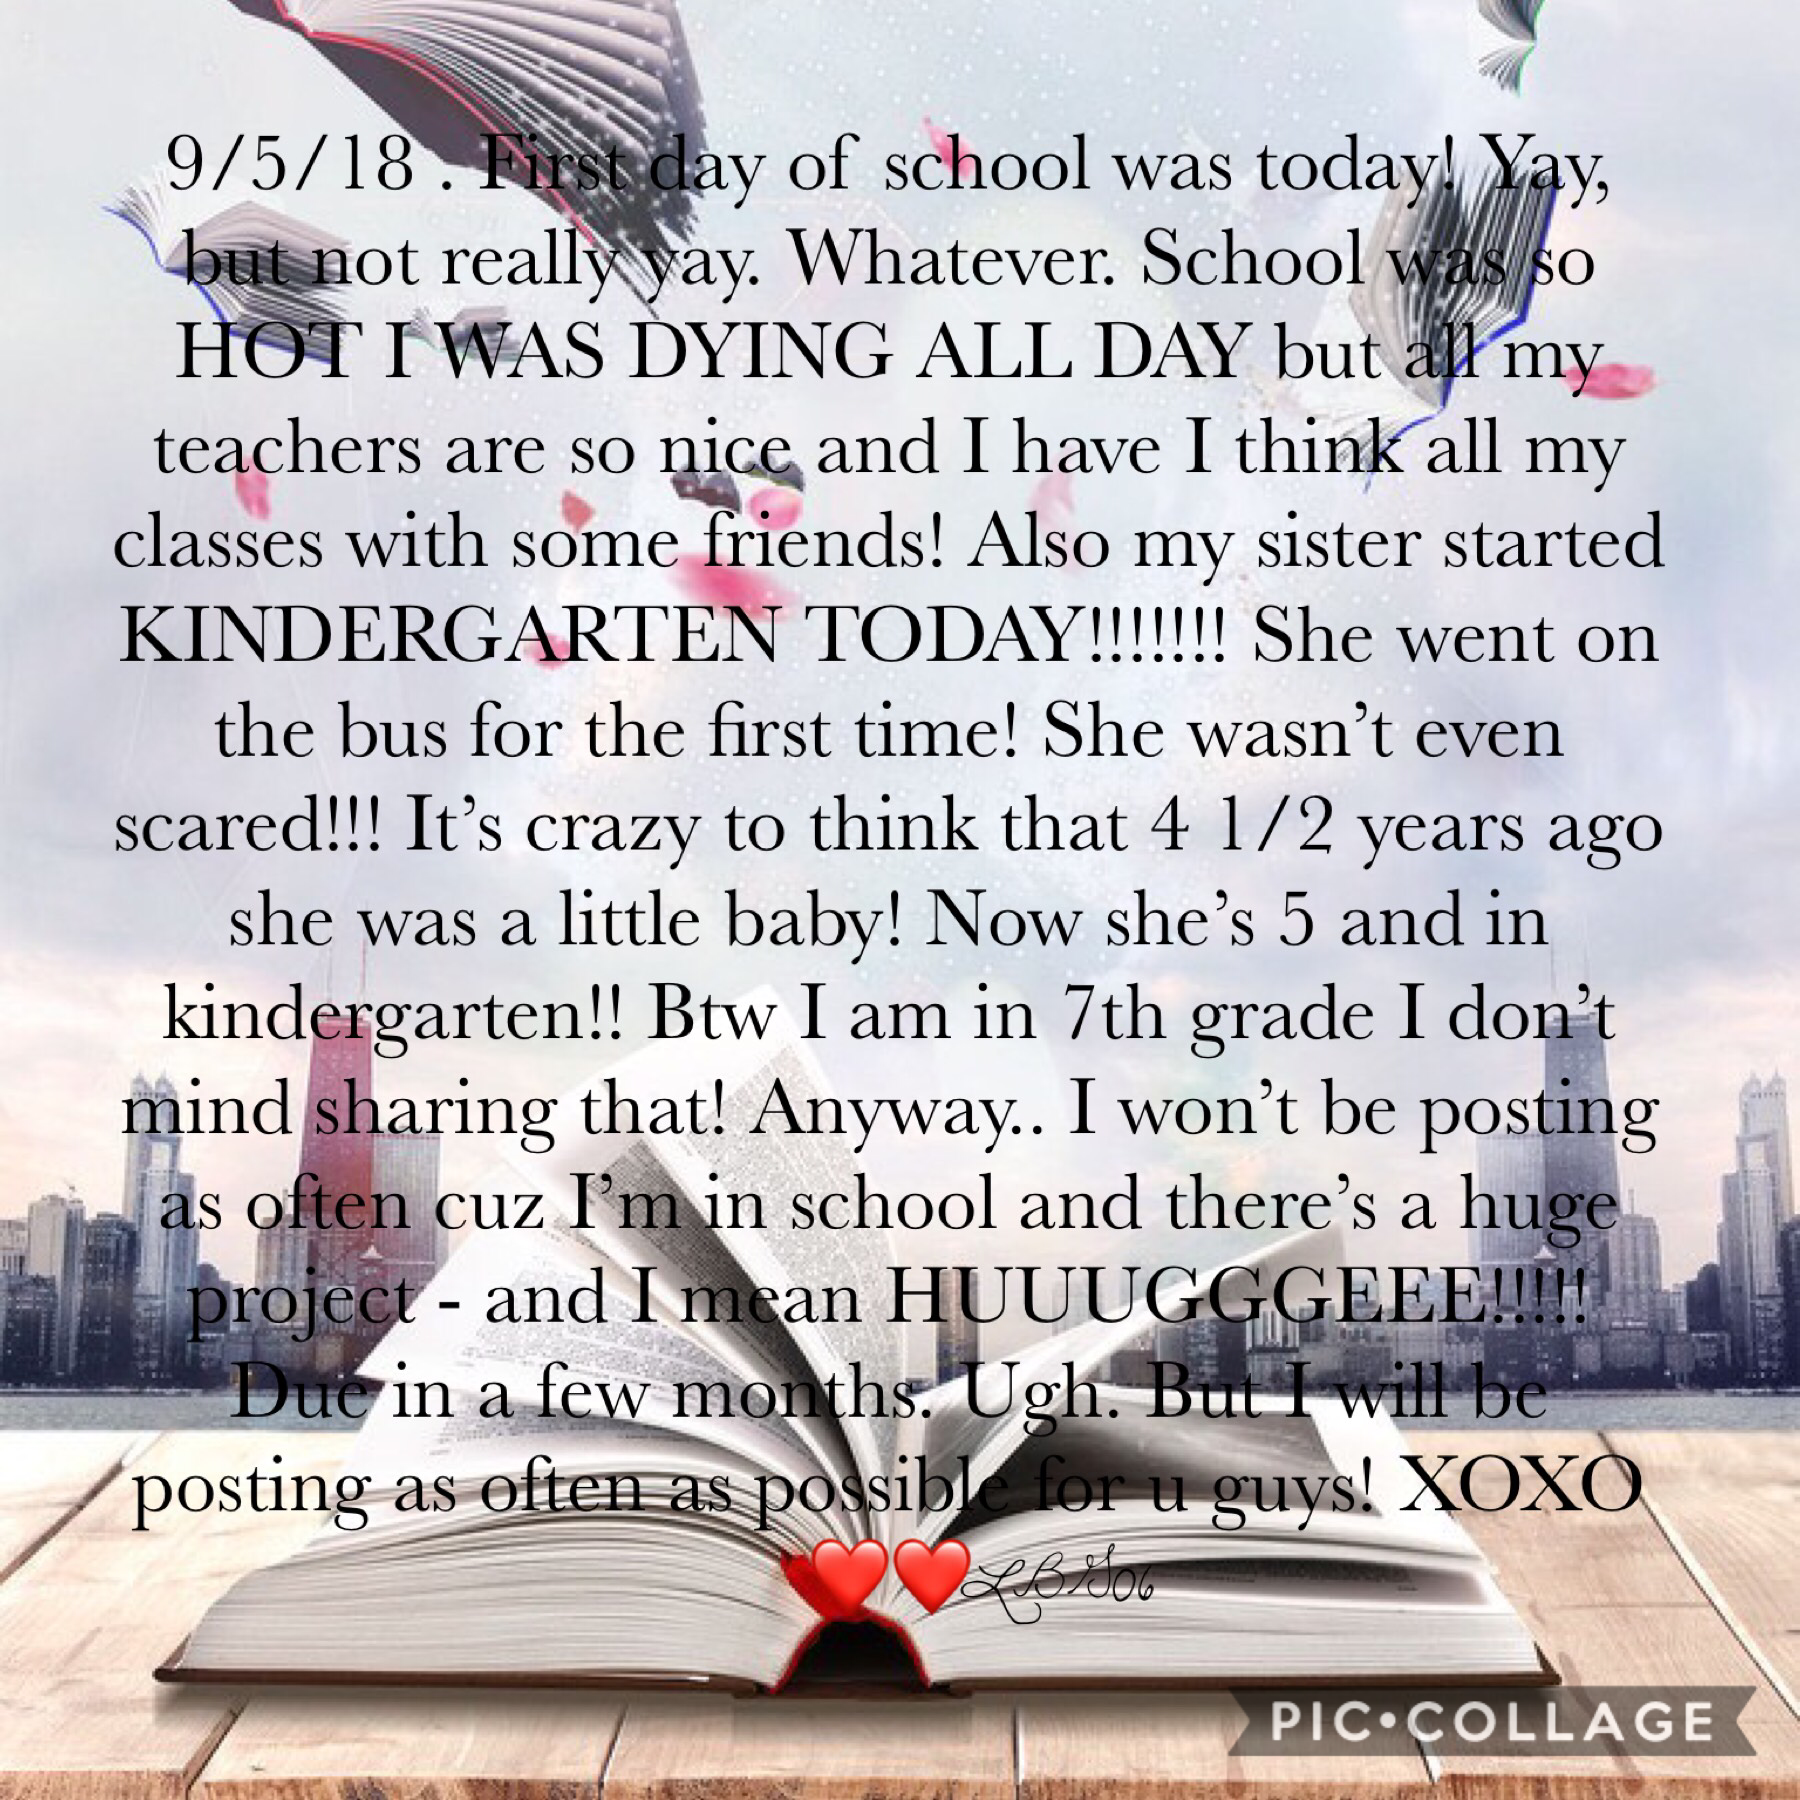 Tap
Read everything up there ^^^

QOTD: what grade are you in/going into? (You don’t have to share if you don’t want to)
AOTD: I’m in 7th grade! Second year in middle school!

❤️Xoxo❤️